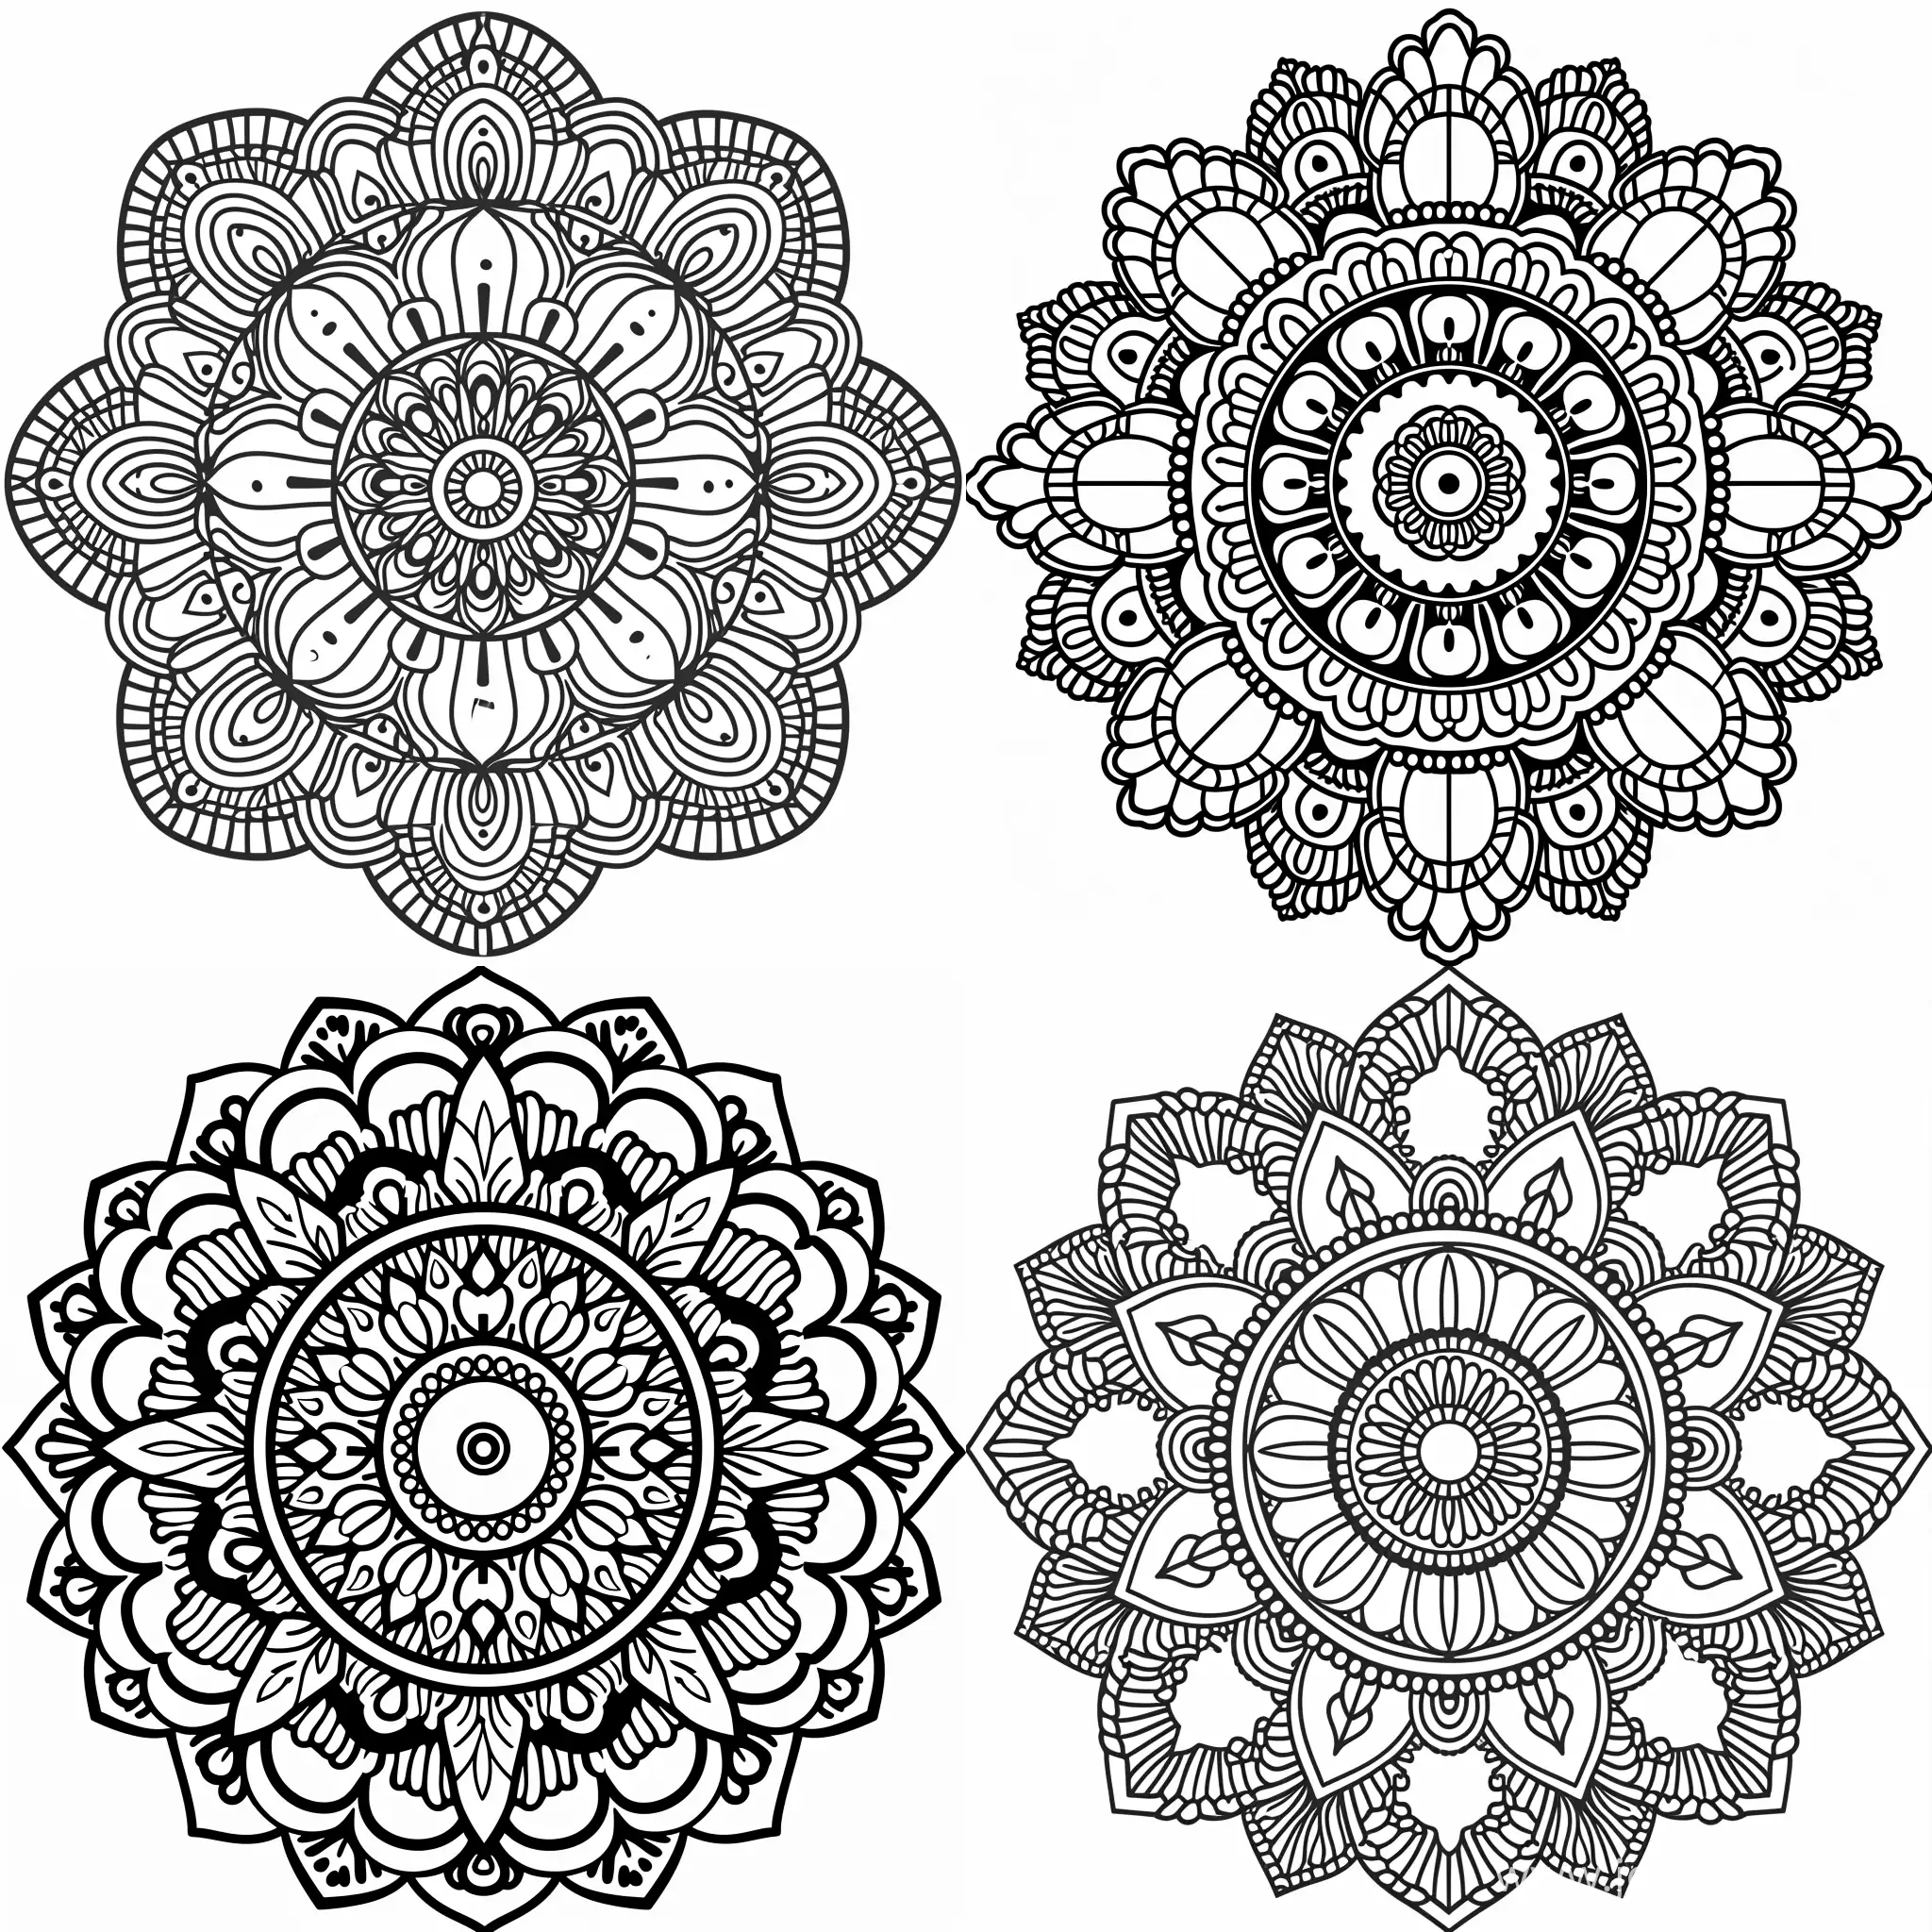 give you 6000 mandala coloring pages for amazon KDP and etsy